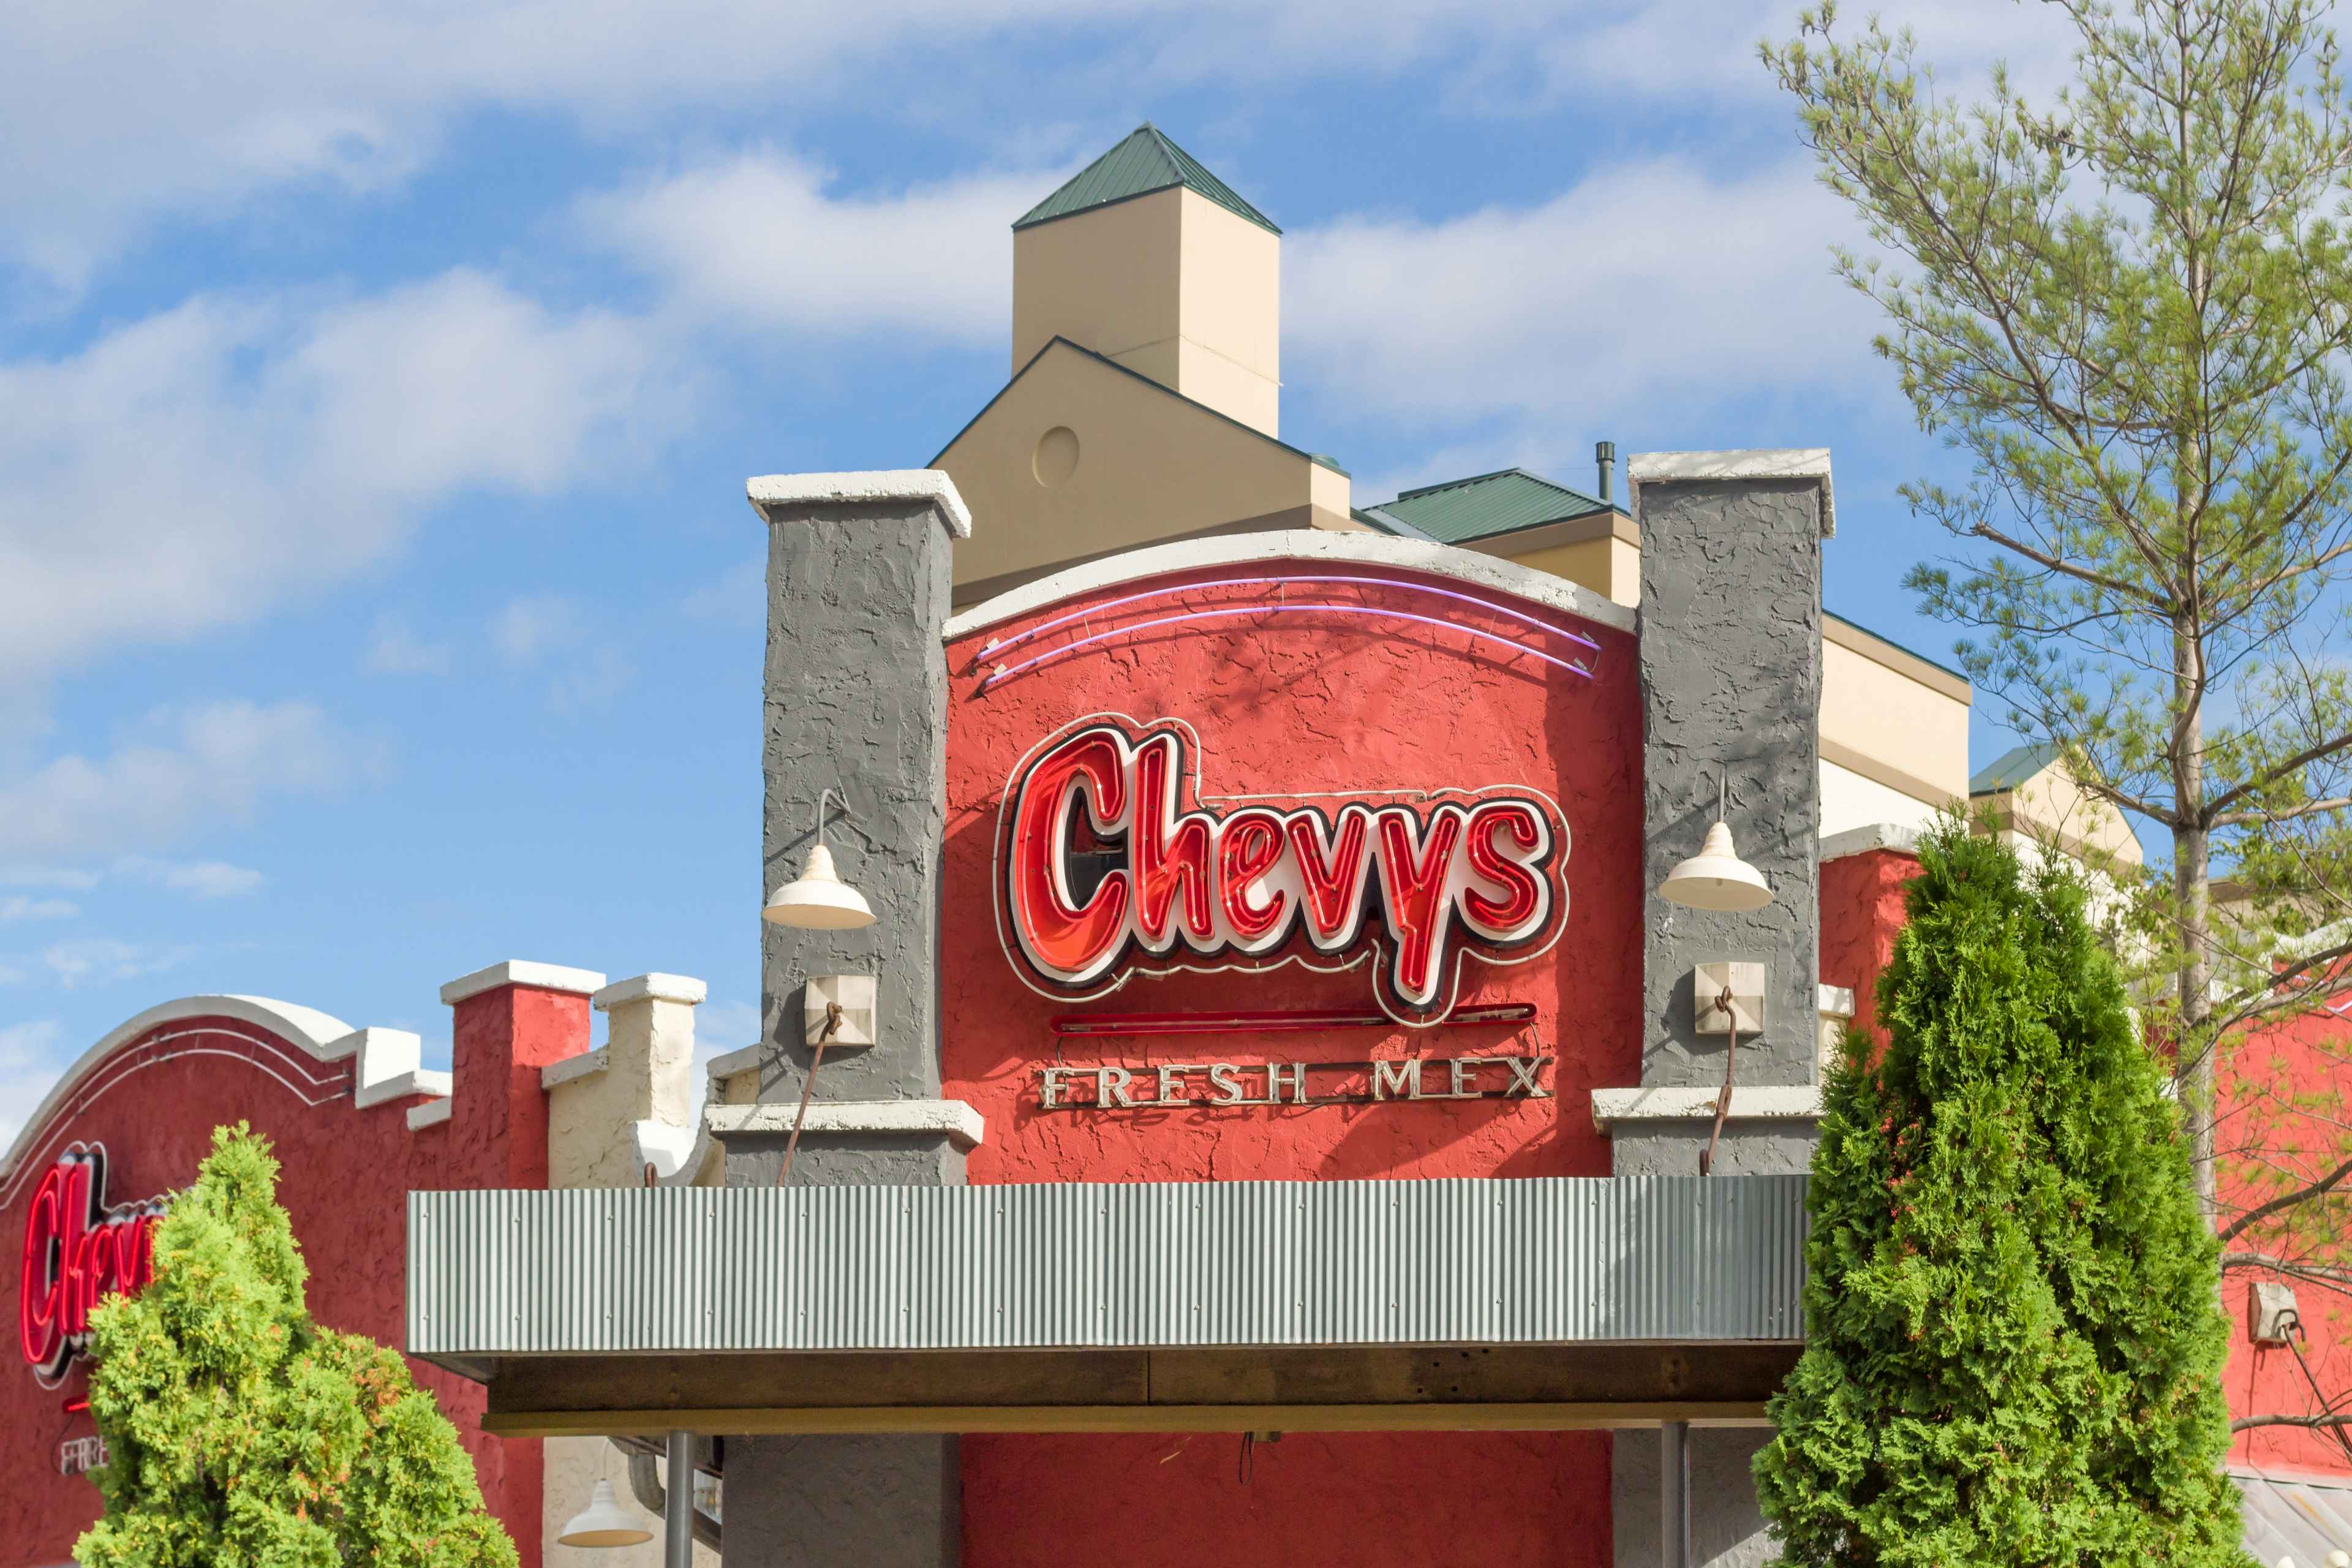 Chevy's Fresh Mex restaurant exterior and logo in Minnesota.